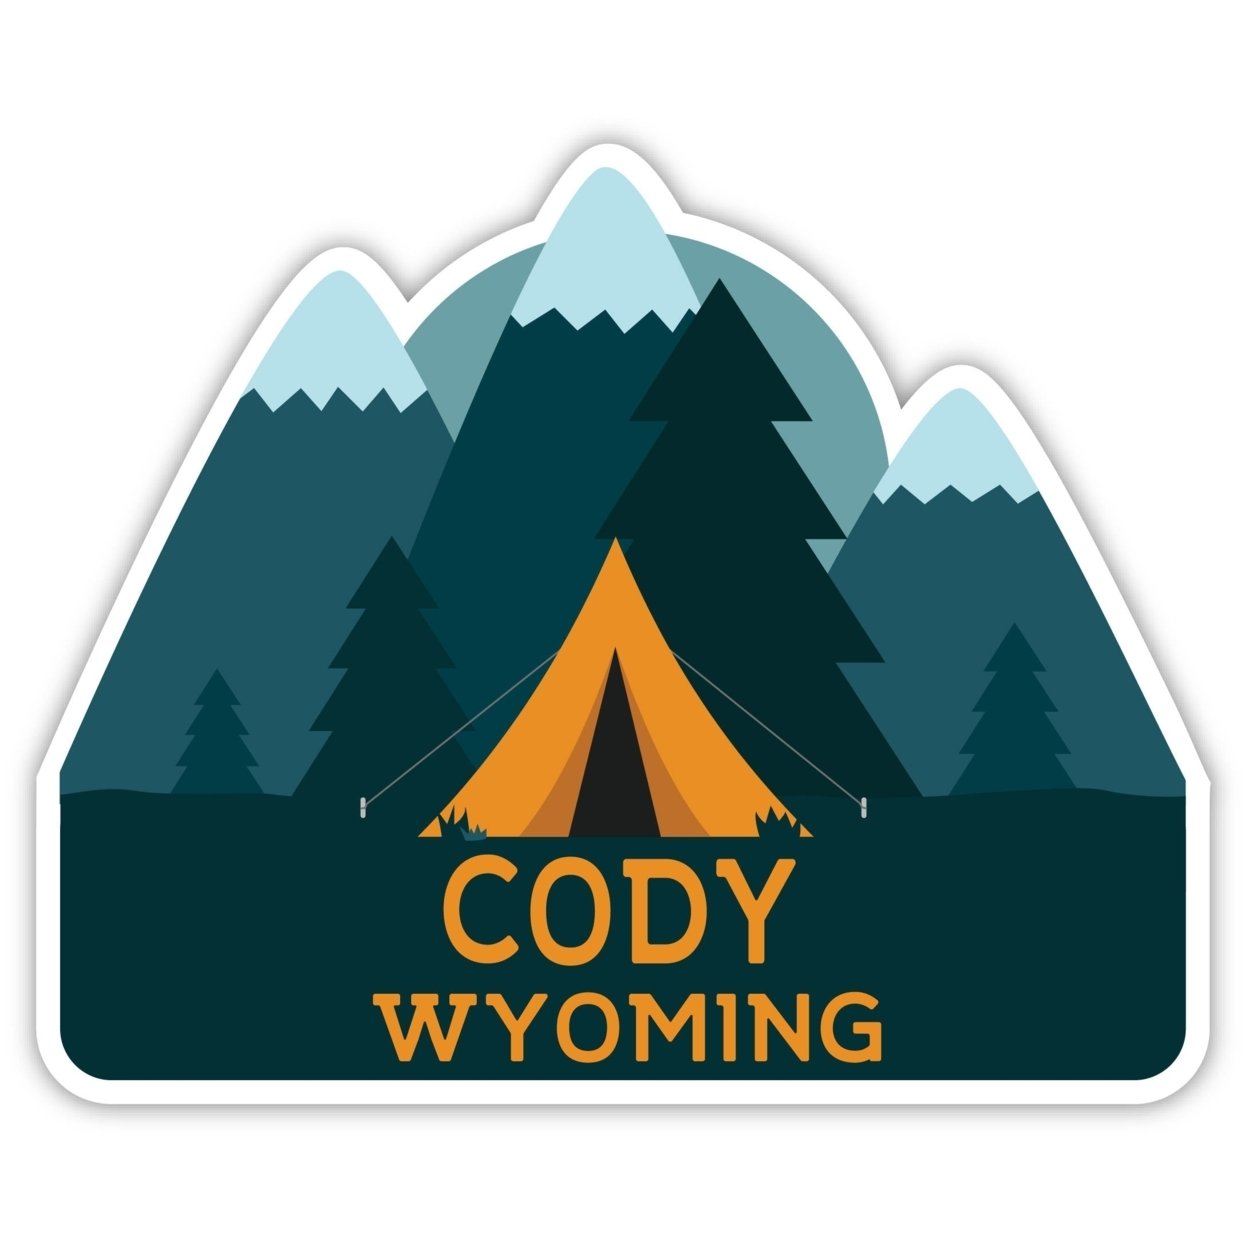 Cody Wyoming Souvenir Decorative Stickers (Choose Theme And Size) - 4-Pack, 2-Inch, Adventures Awaits